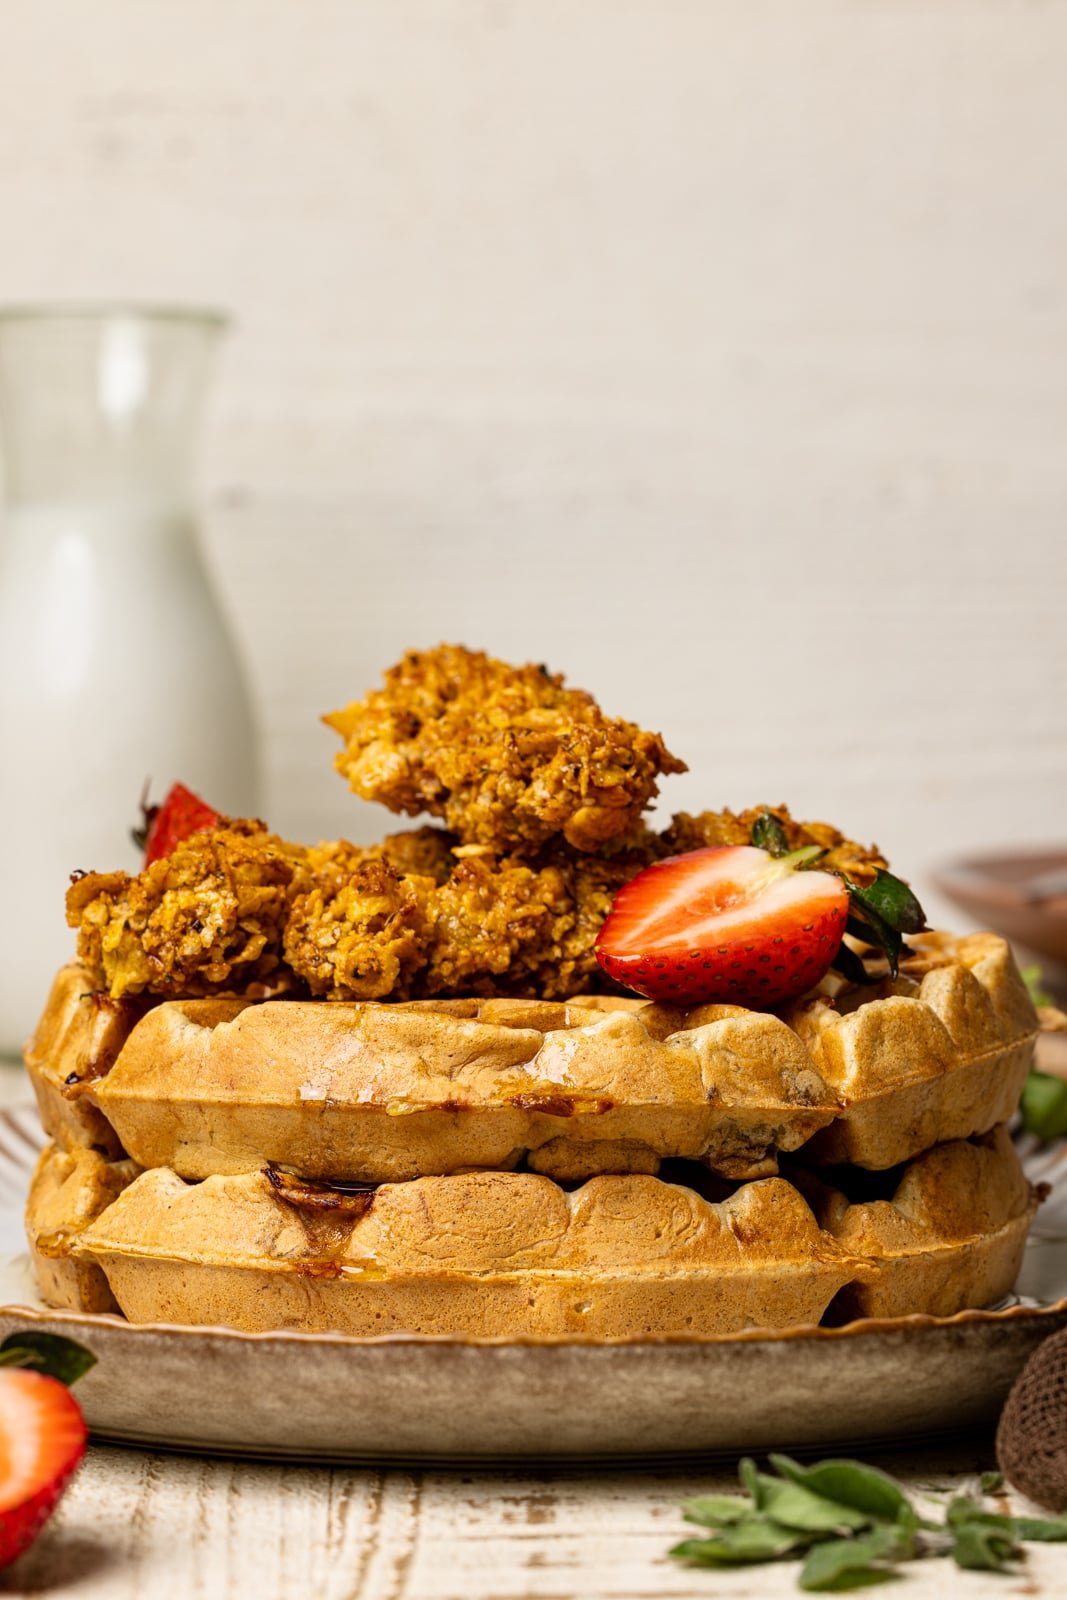 Chicken and waffles on a plate with sliced strawberries and a glass of milk.